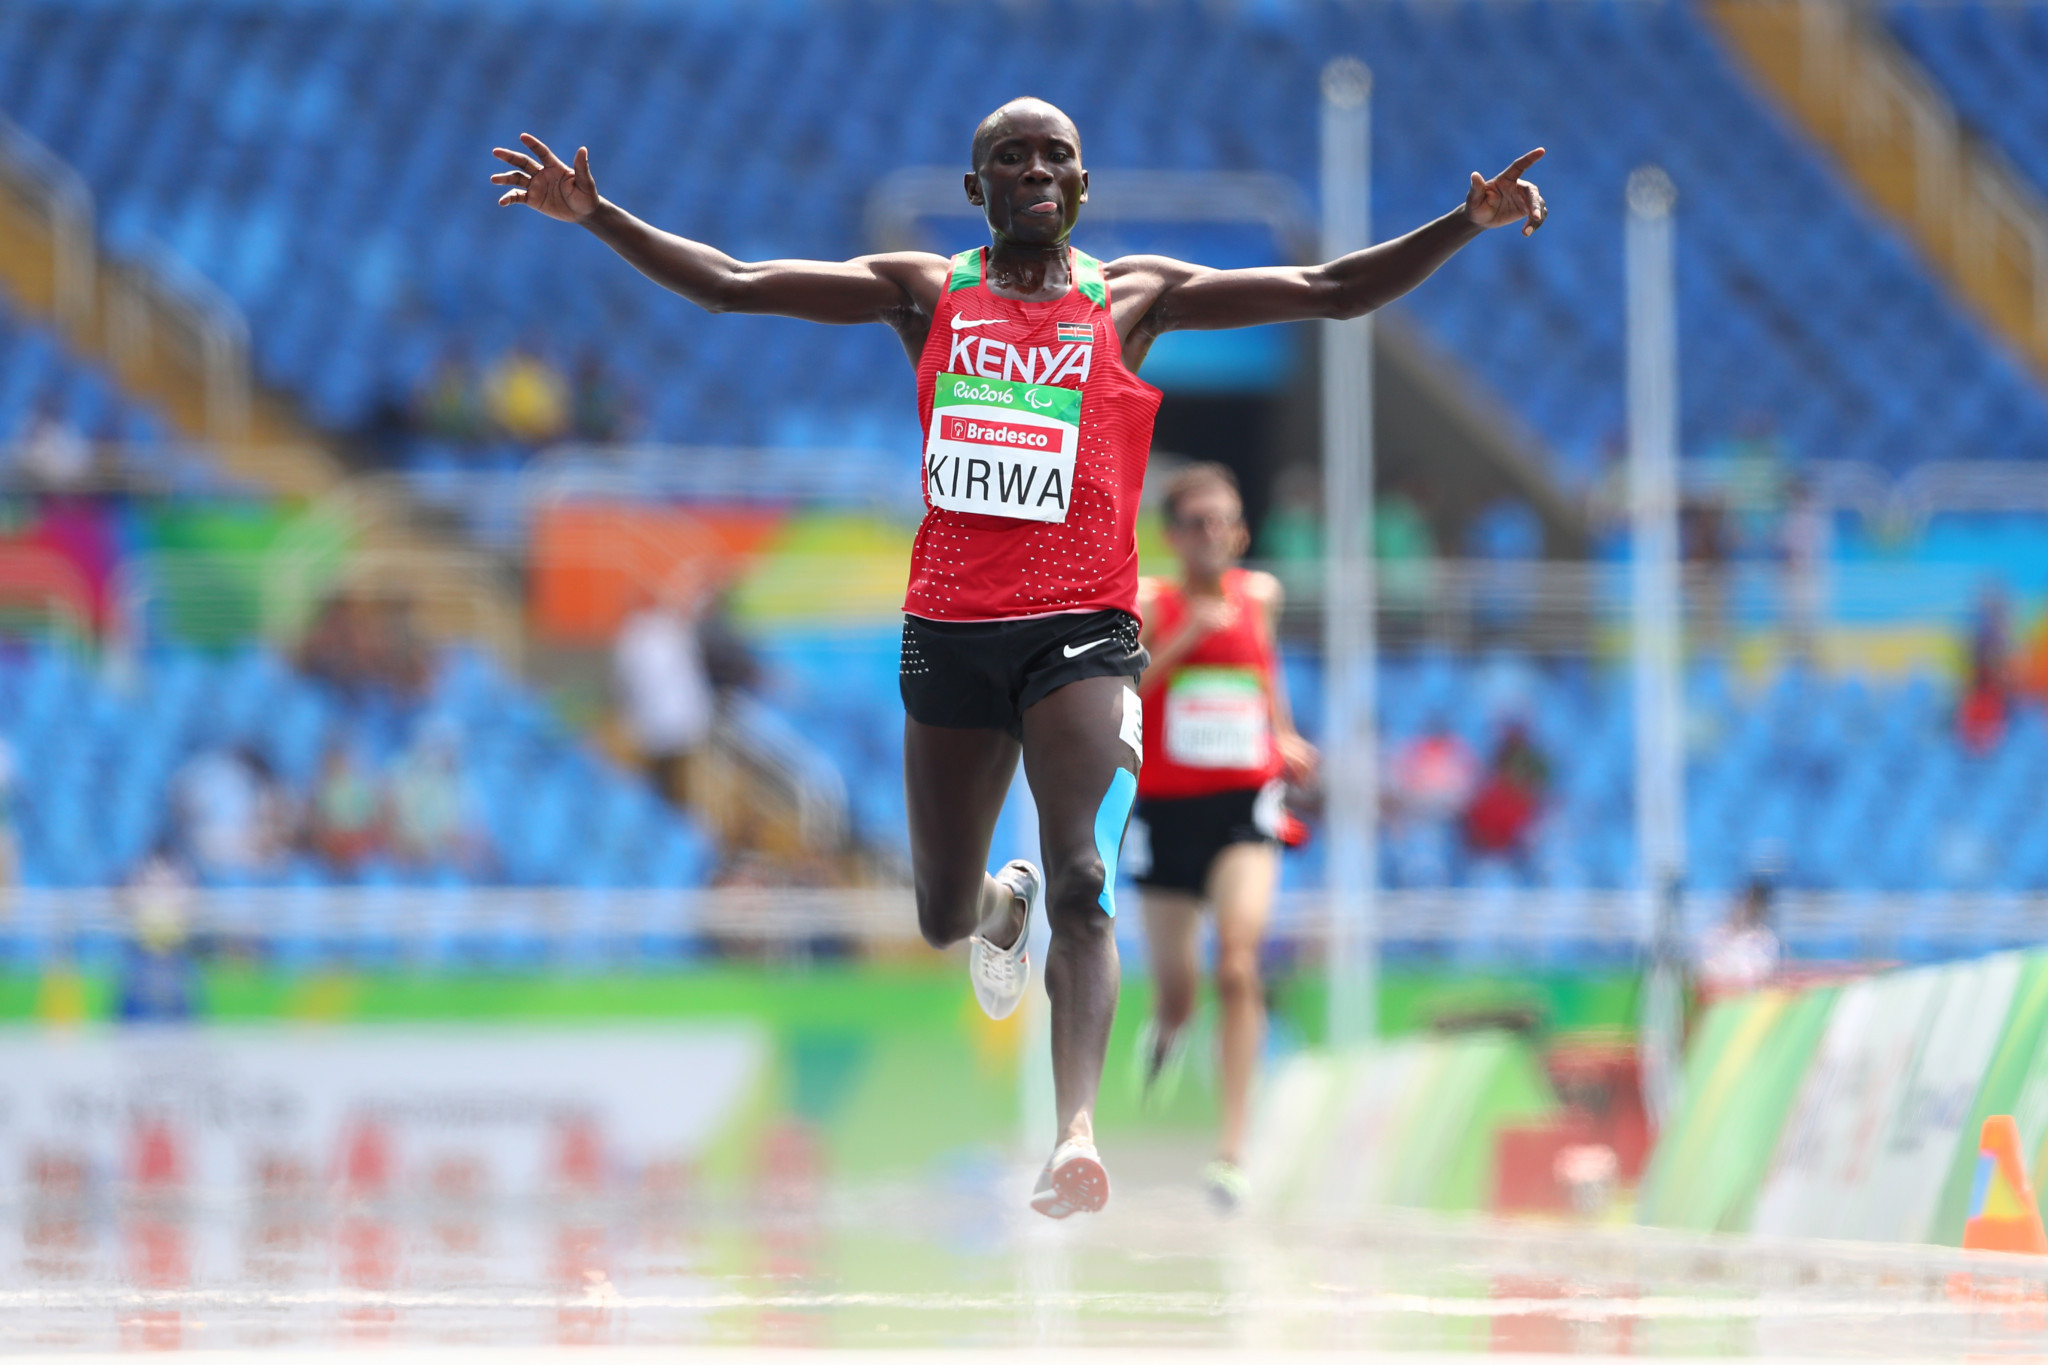 Henry Kirwa has earned four gold medals across three Paralympic Games during his career so far ©Getty Images